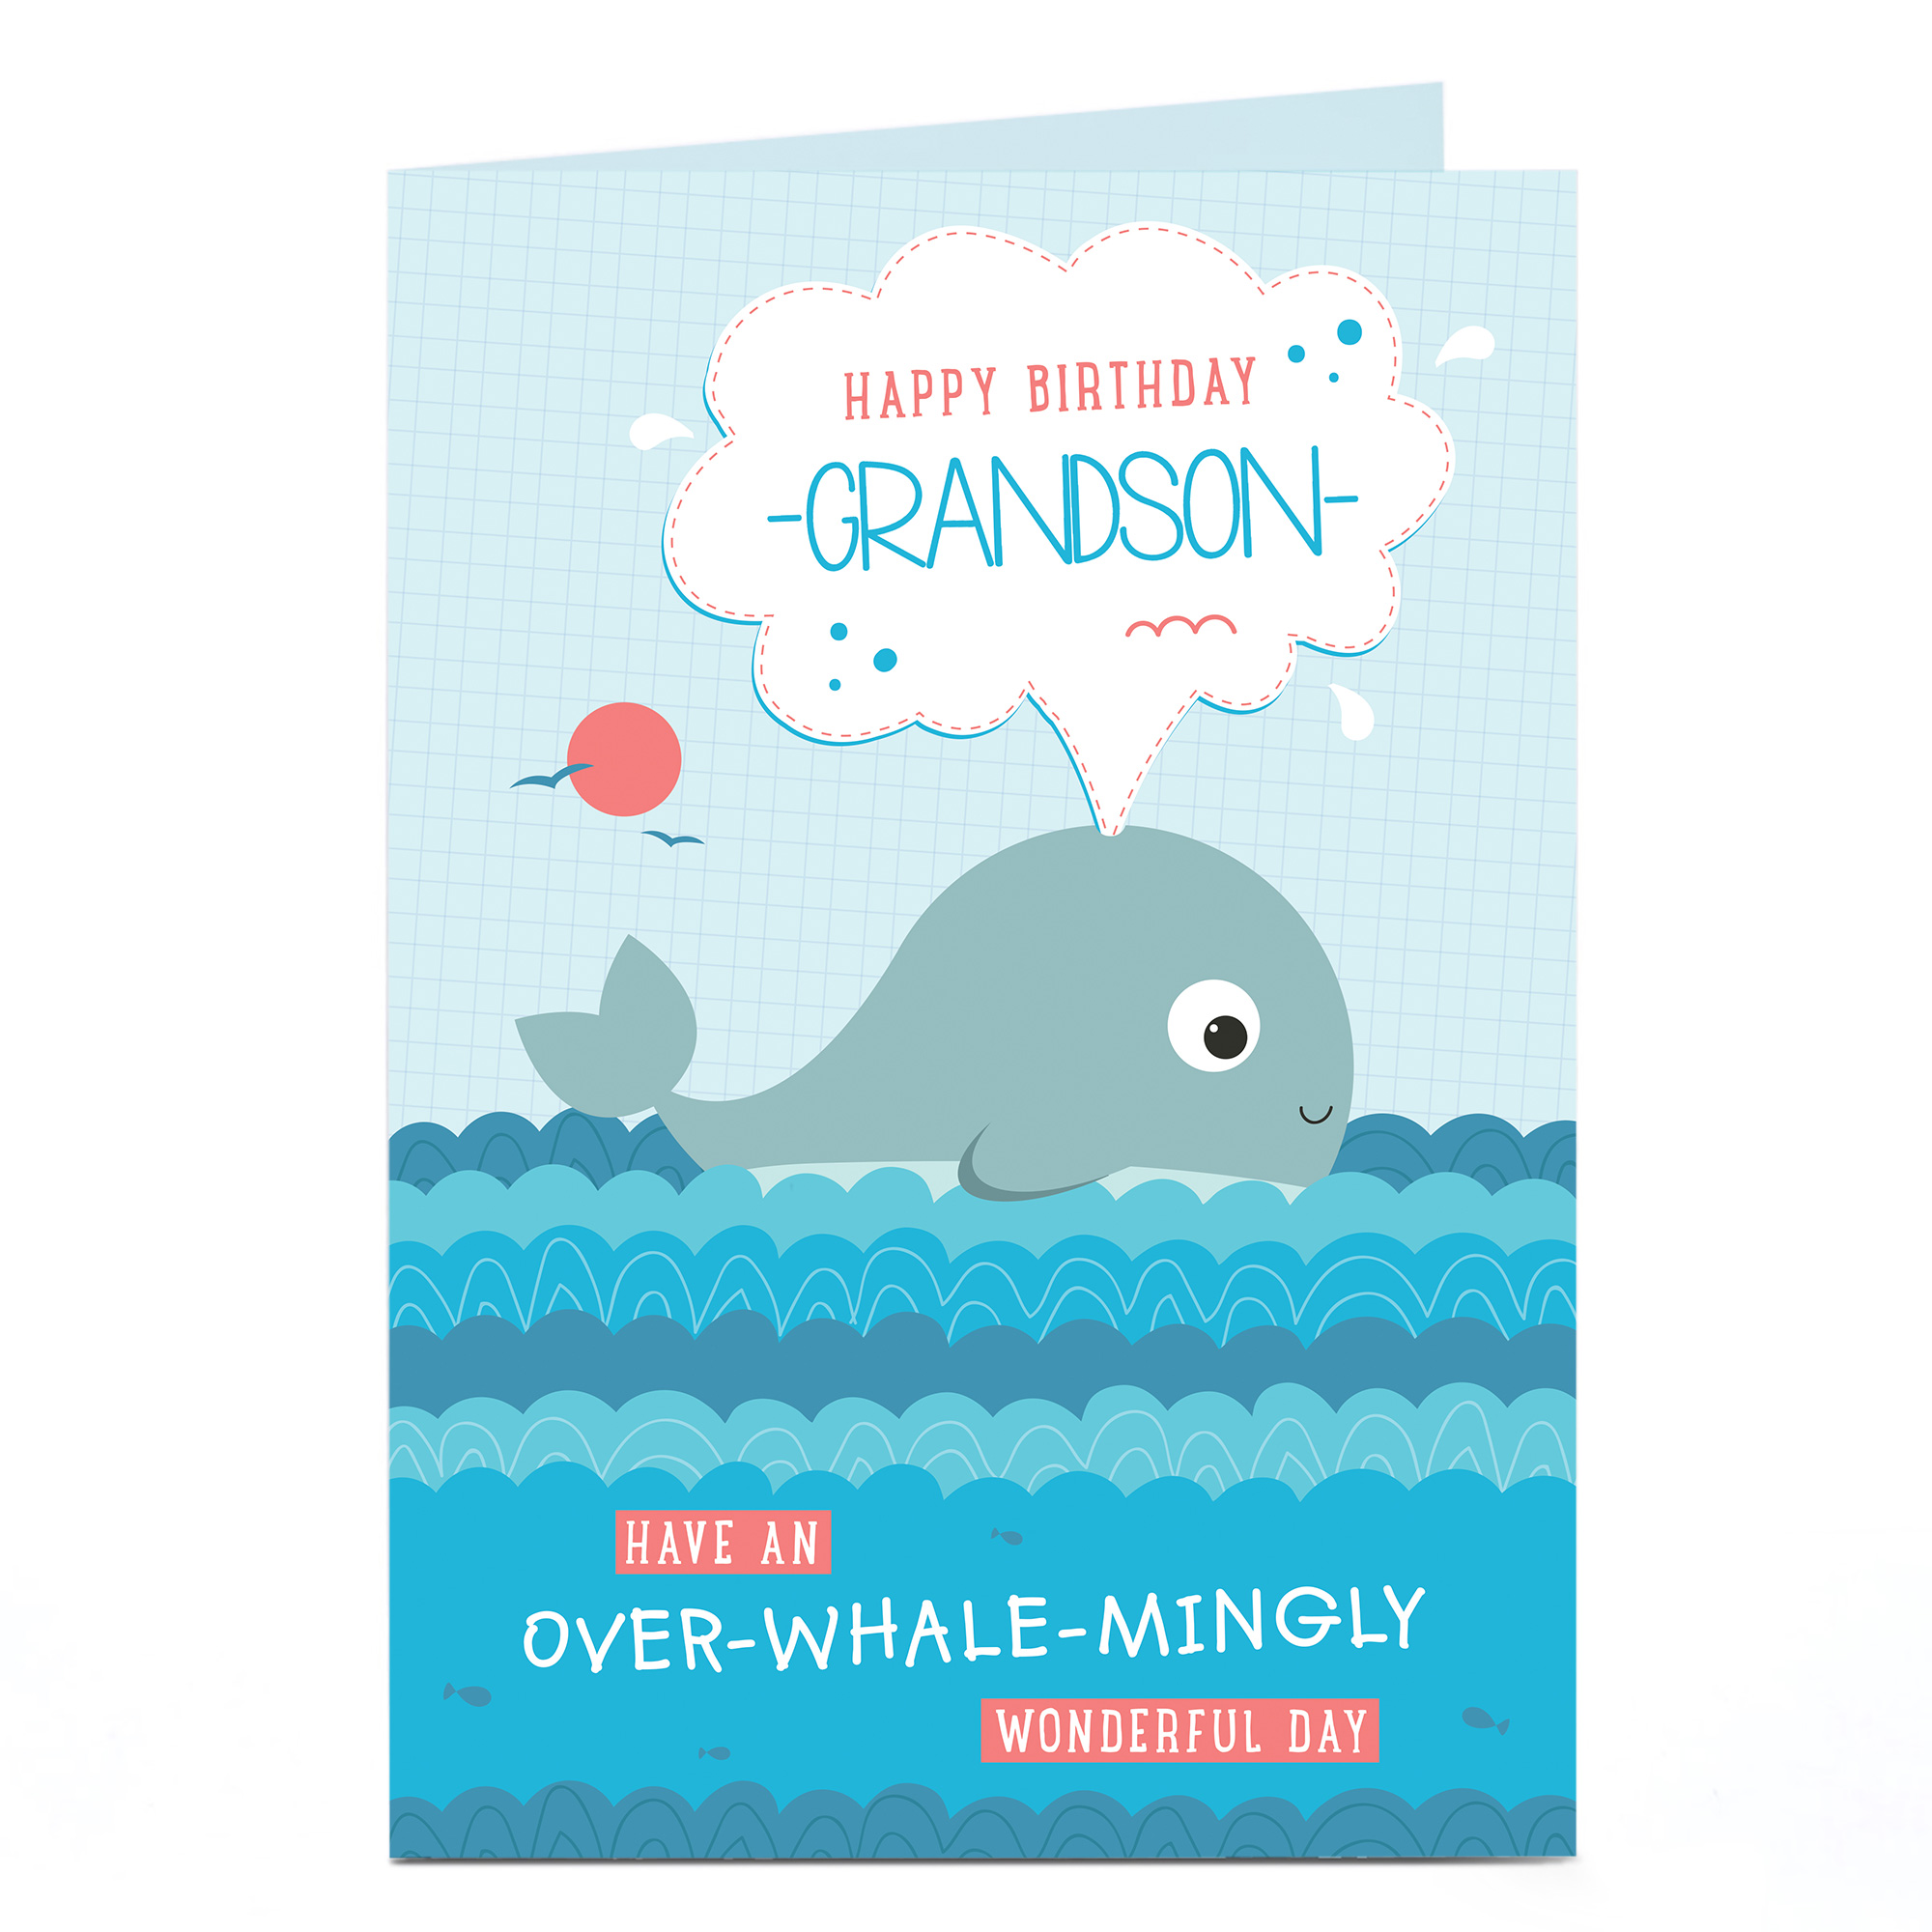 Personalised Birthday Card - Over-Whale-Mingly Wonderful [Grandson]